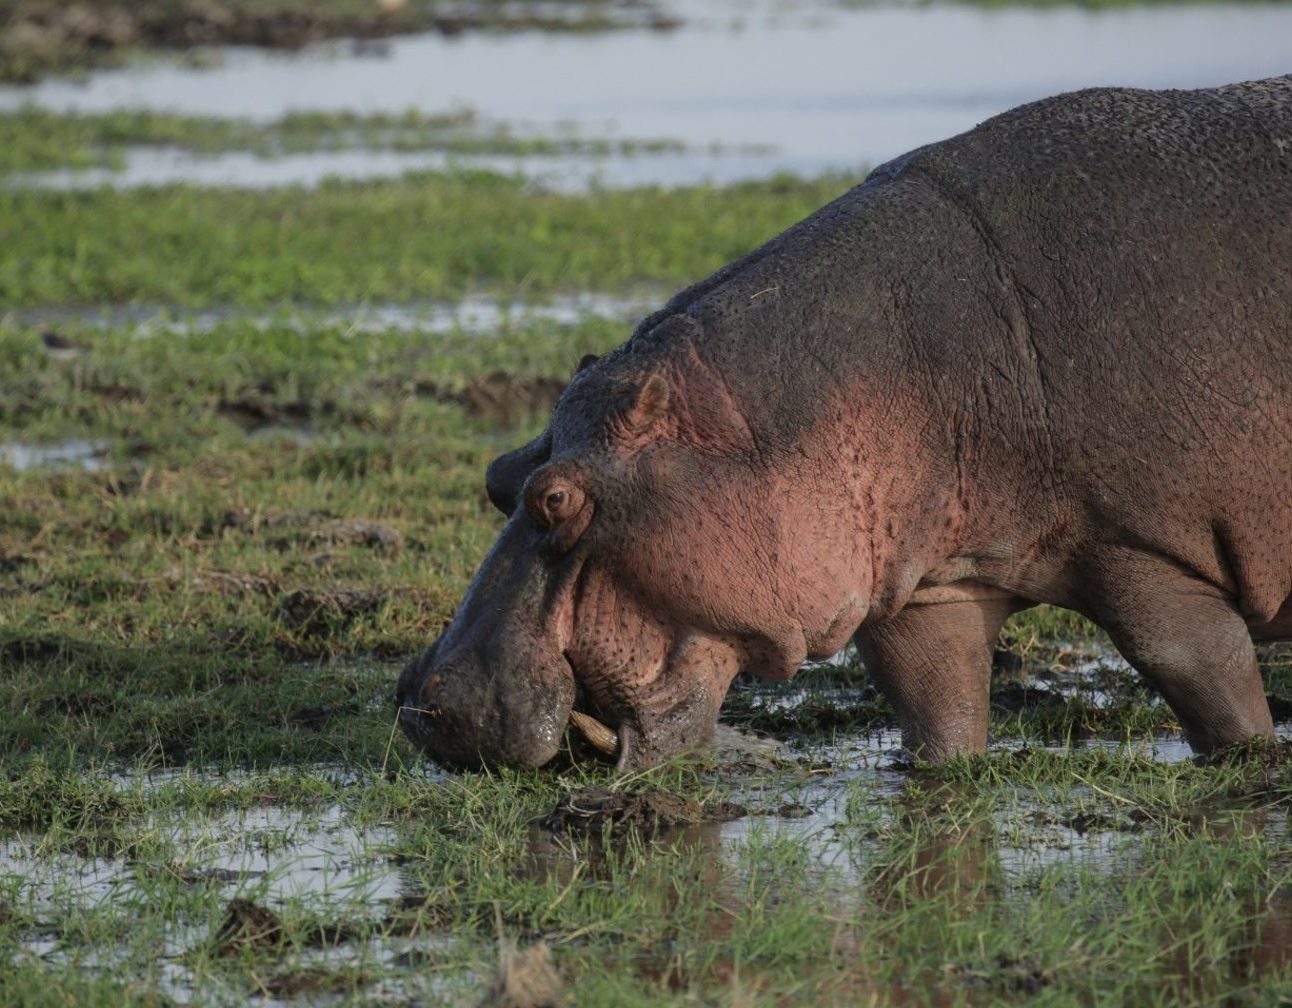 A hippo grazing in a marshy area of grass